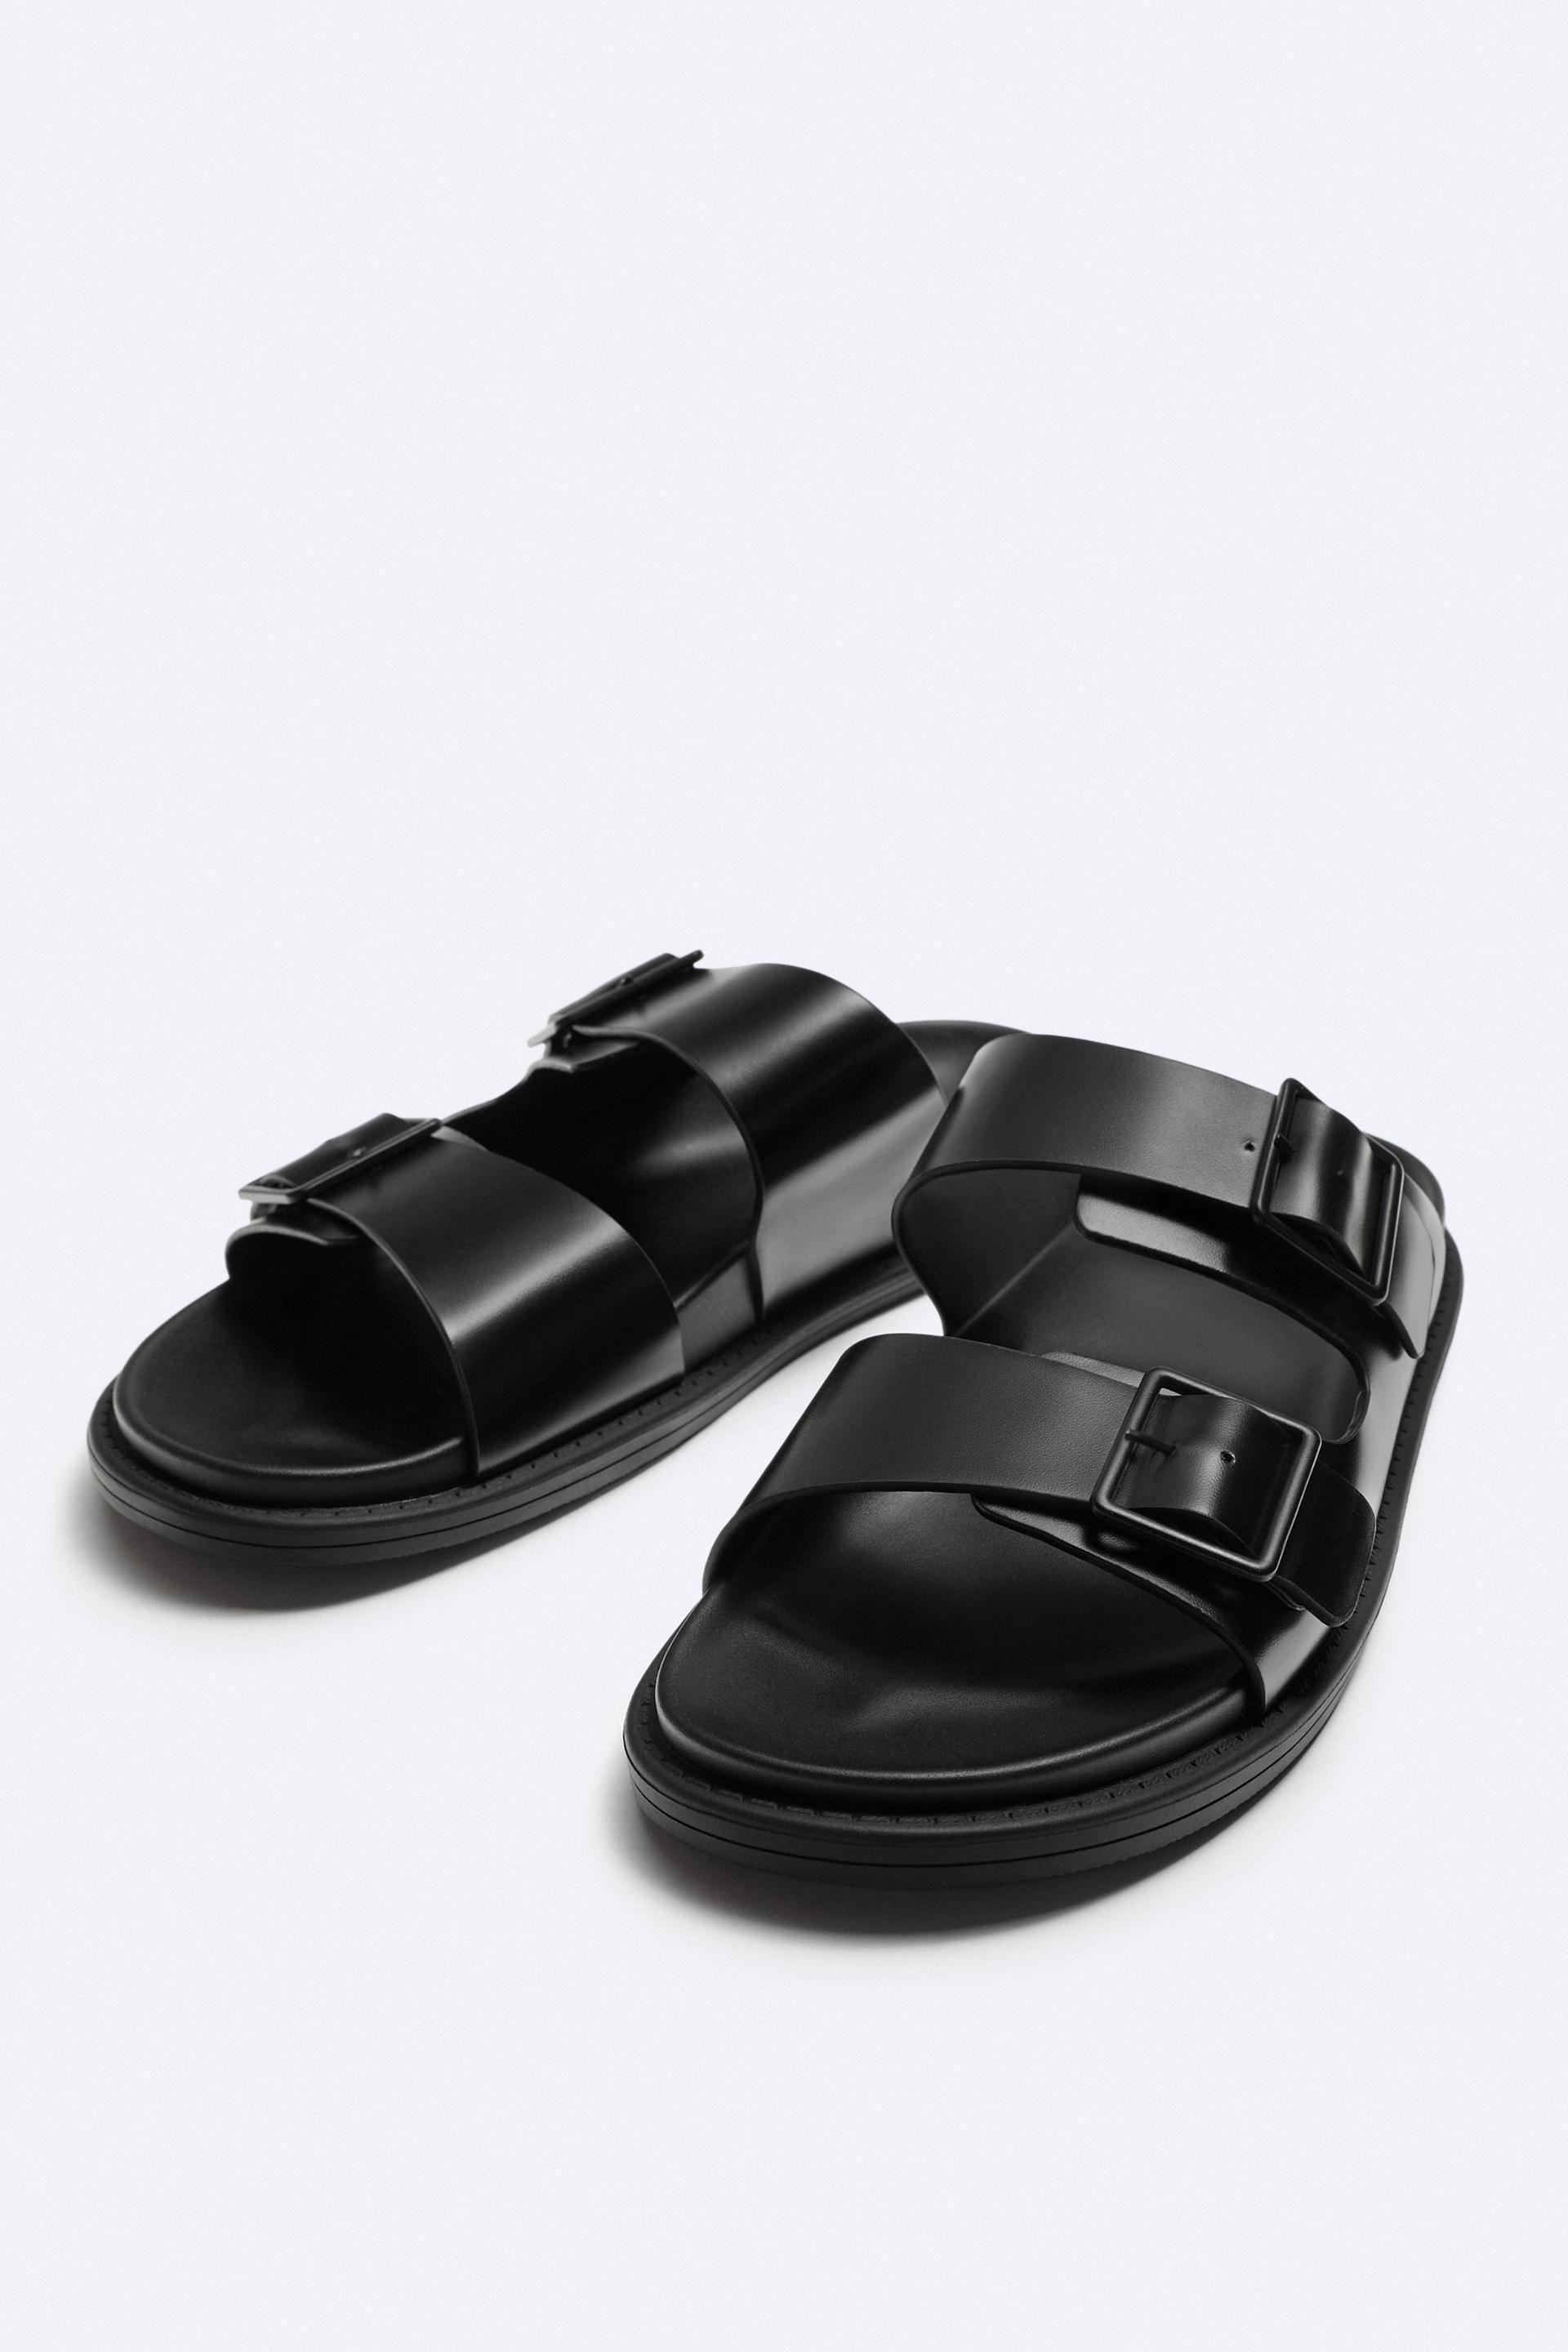 DOUBLE STRAP BUCKLE SANDALS Product Image